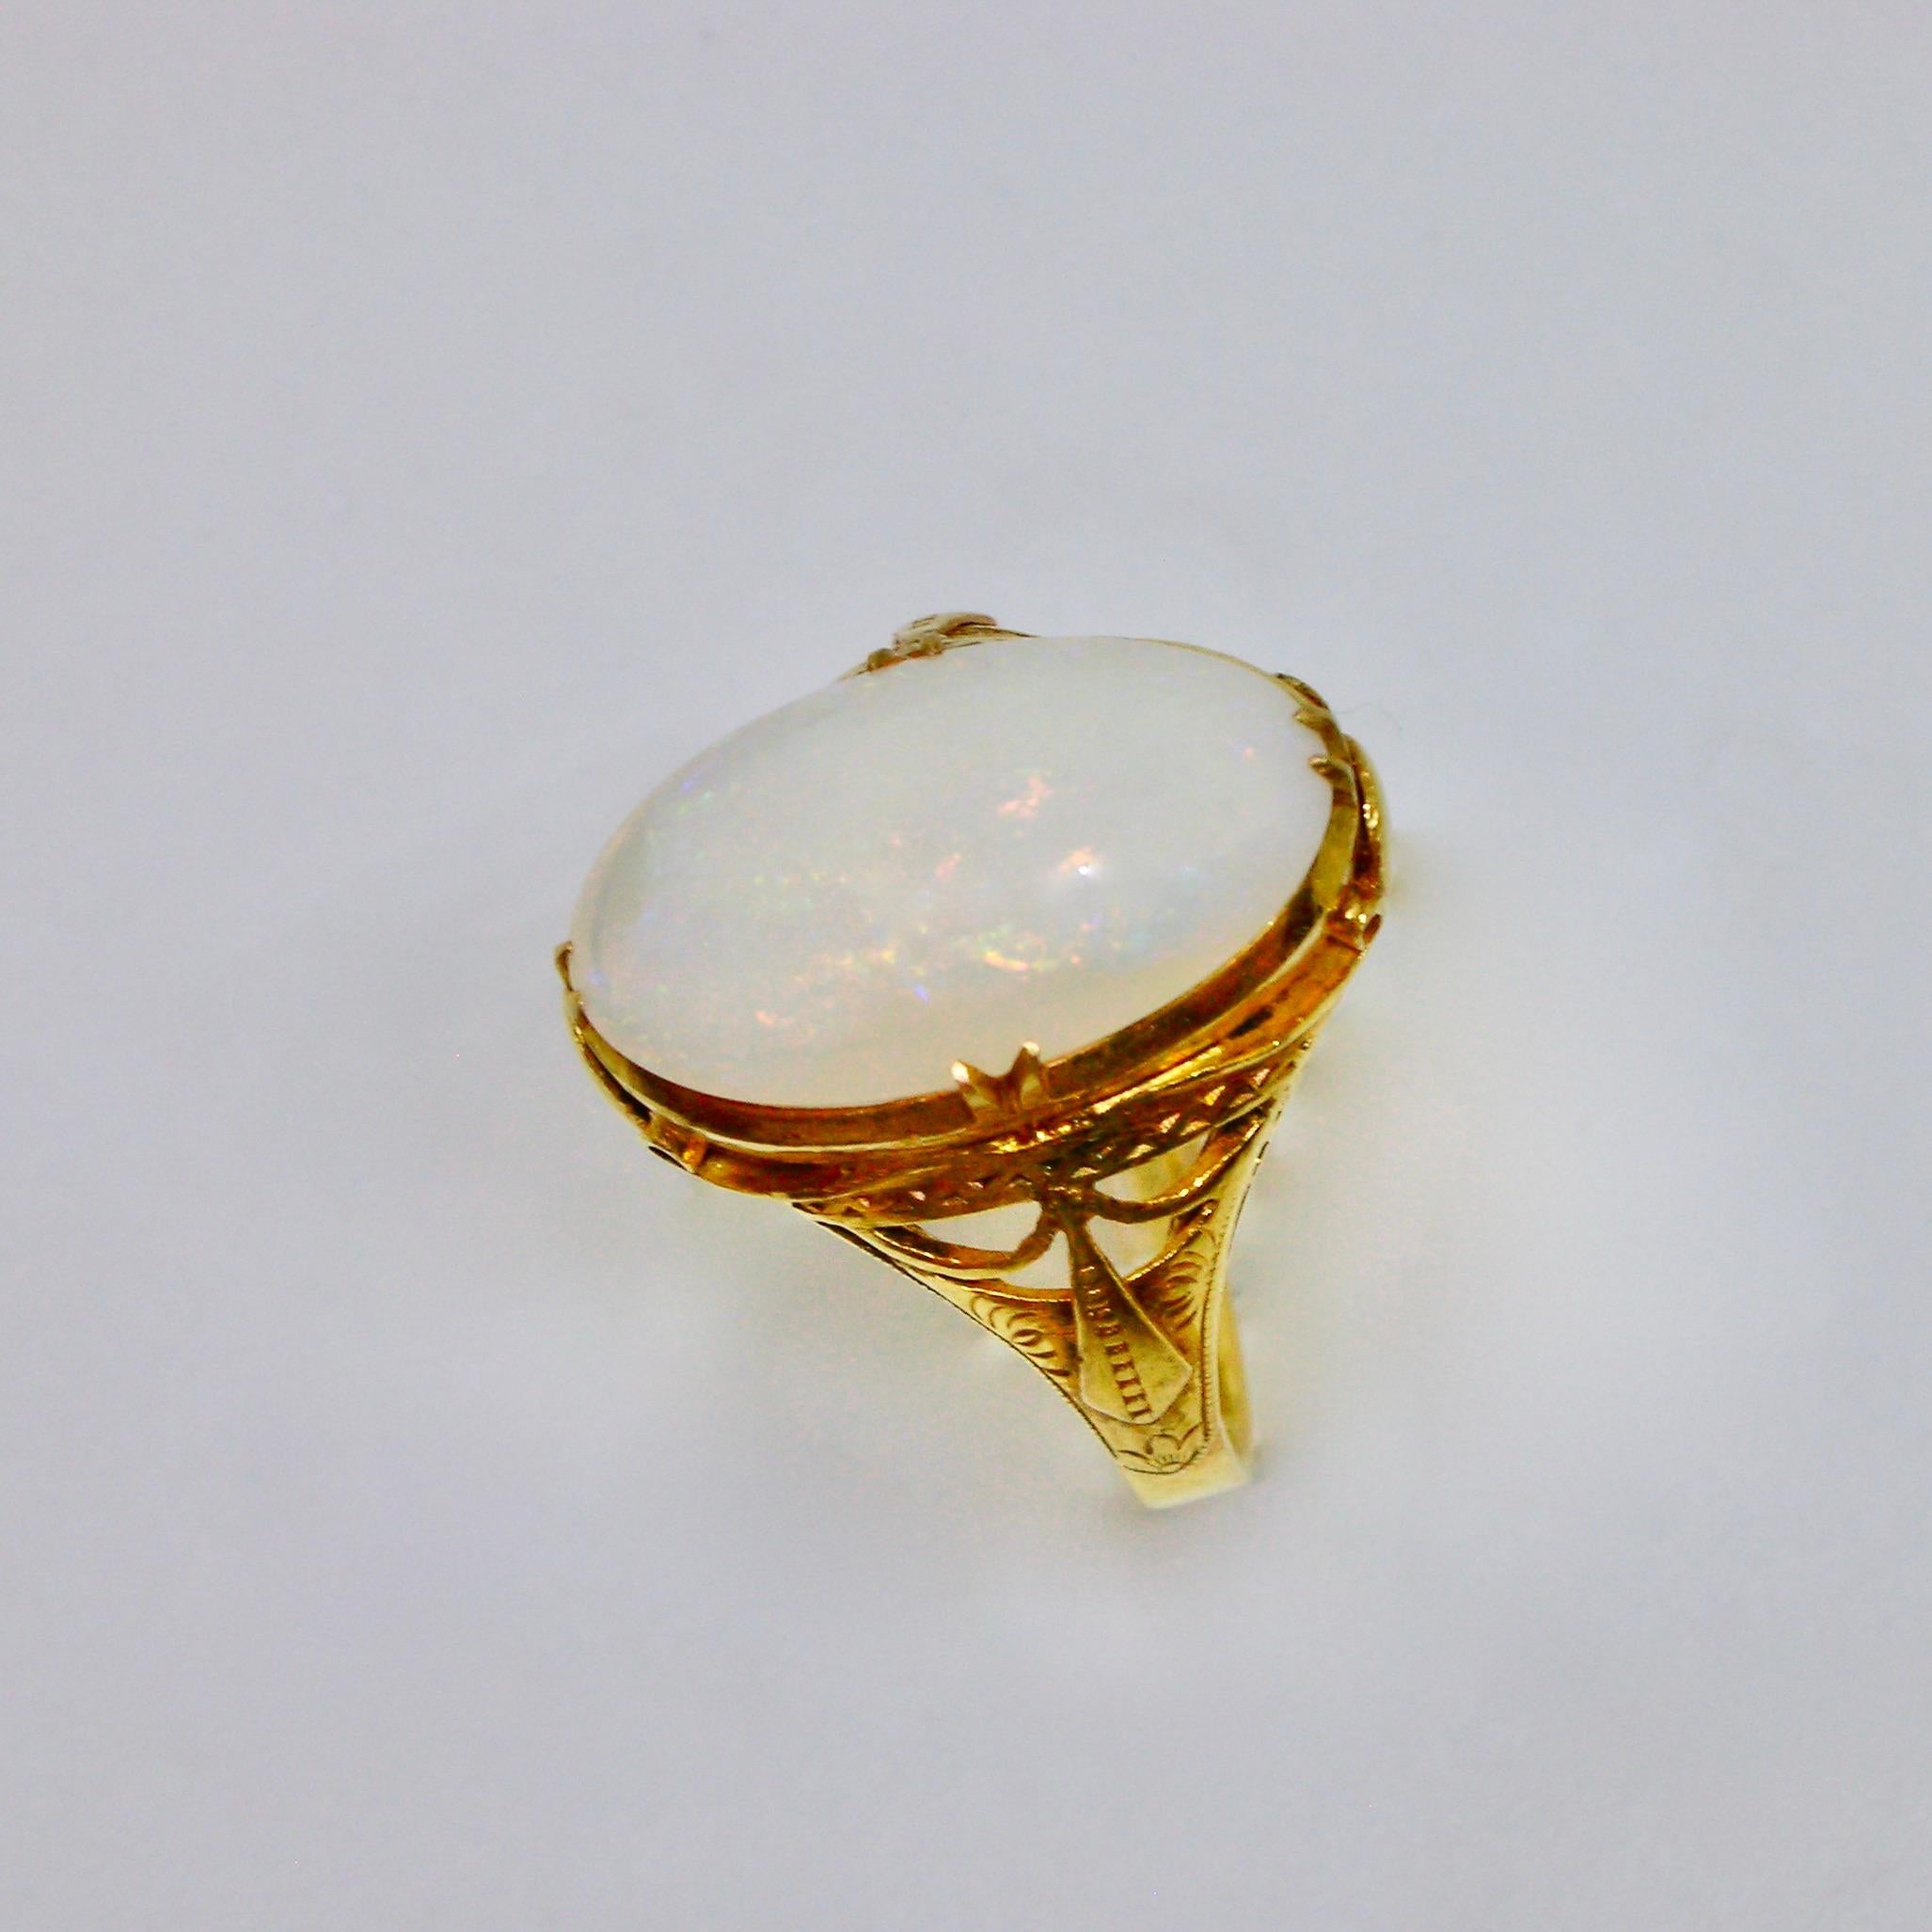 If you like simplicity, this exquisite Art Nouveau ring might be for you. The attention to detail and quality of craftmanship reminds us of jewelry that is no longer found. Opals are known for their iridescence and this is clearly seen in this stone